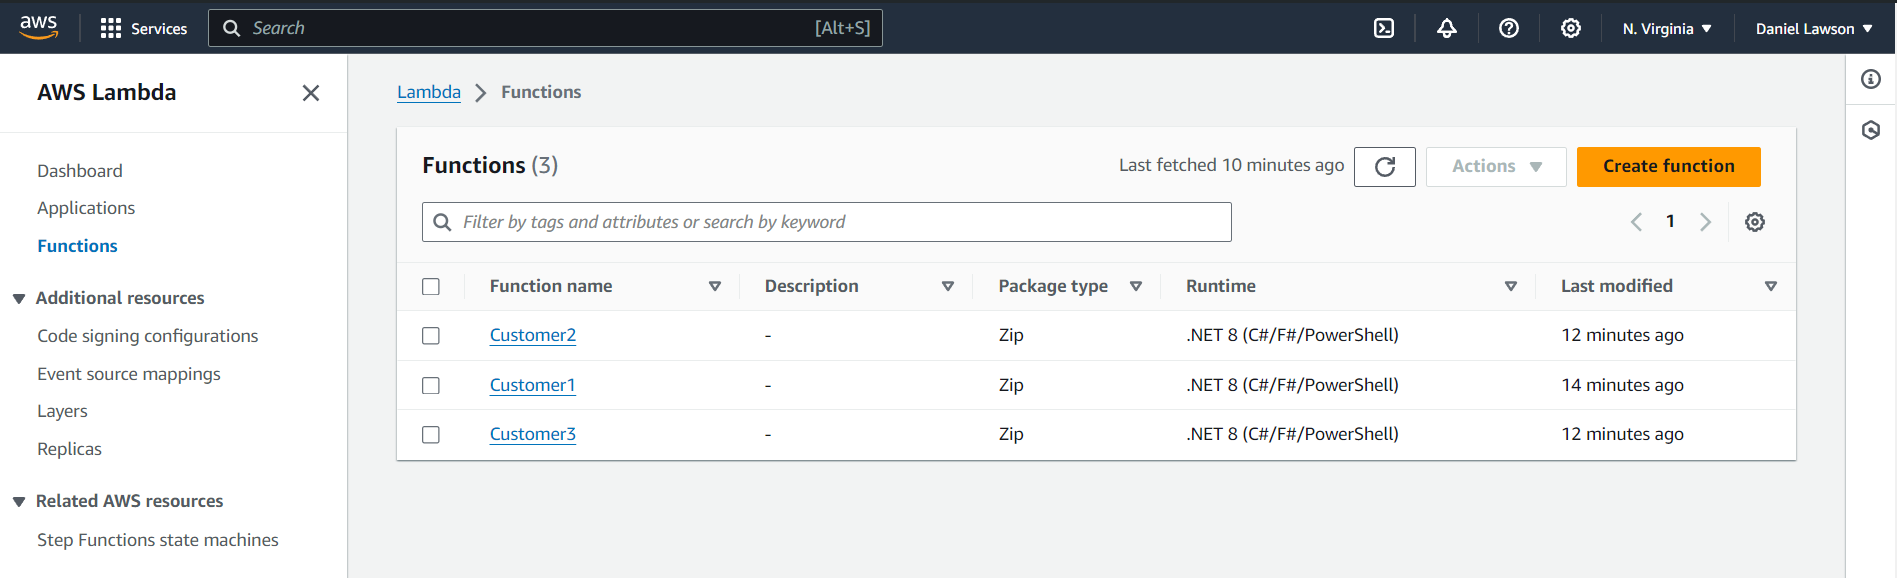 Lambda functions in AWS Console